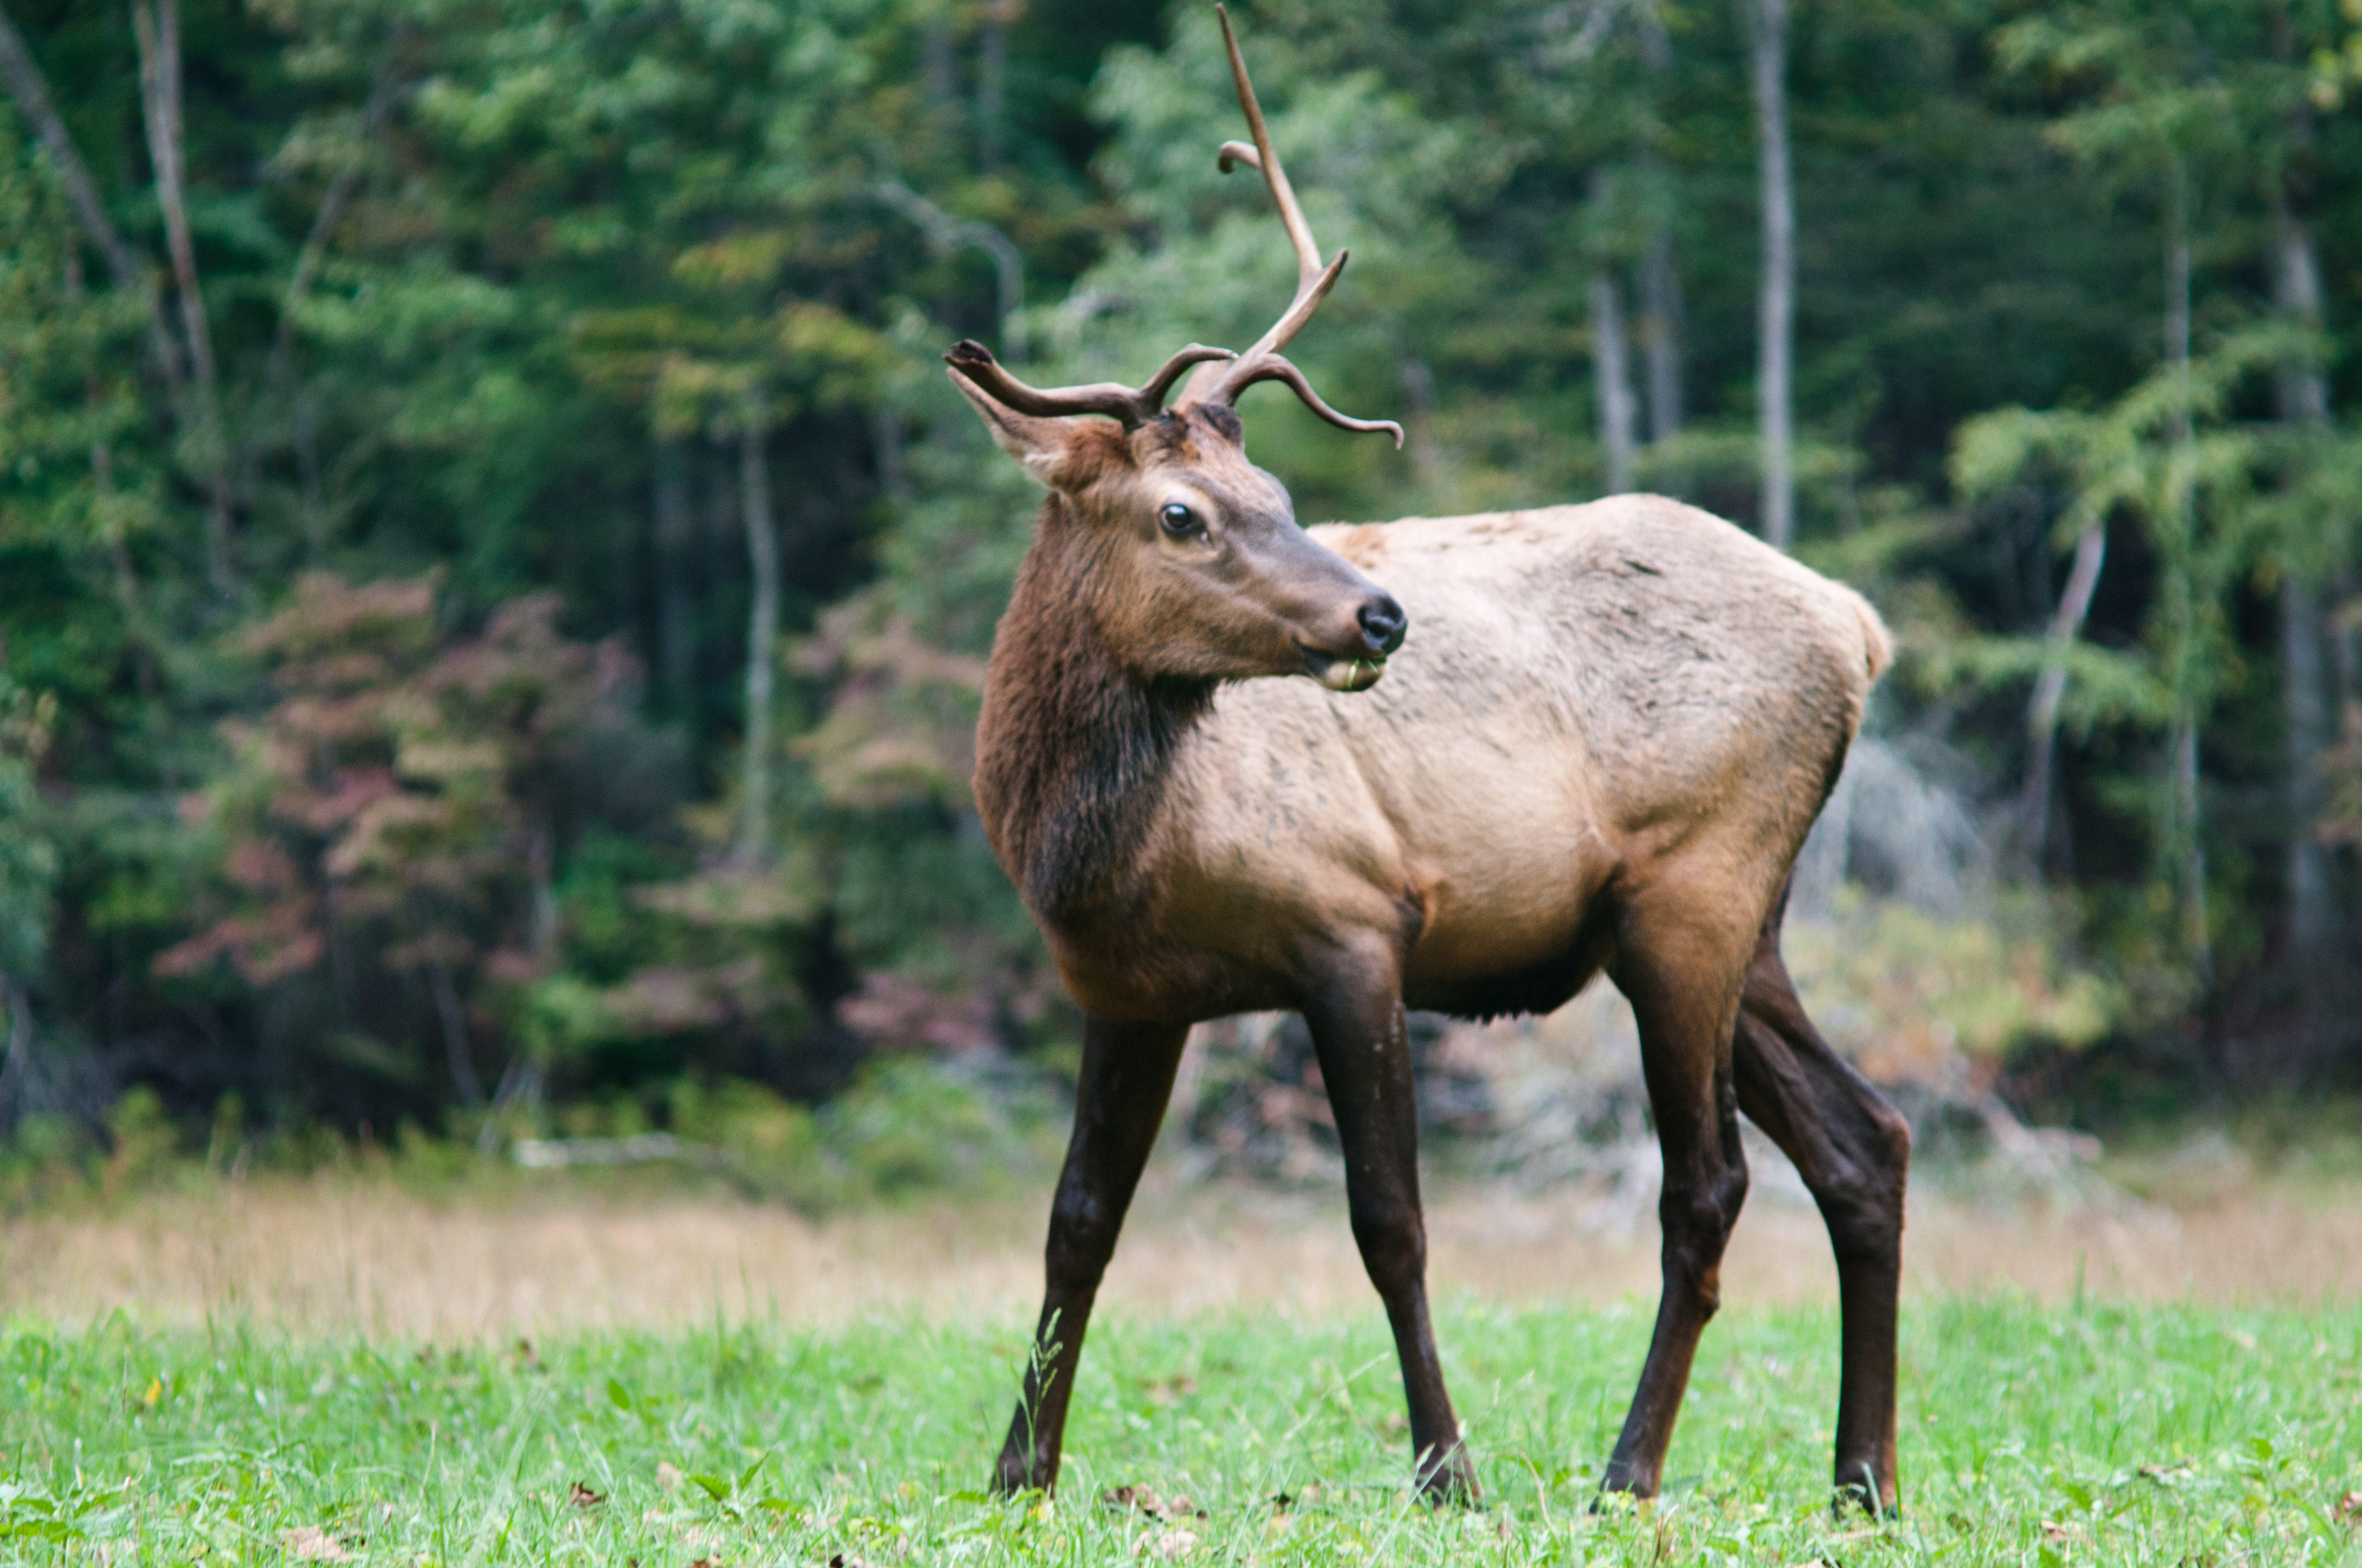 A bull elk in Great Smoky Mountains National Park. Image by Jim McKinley / Moment Open / Getty